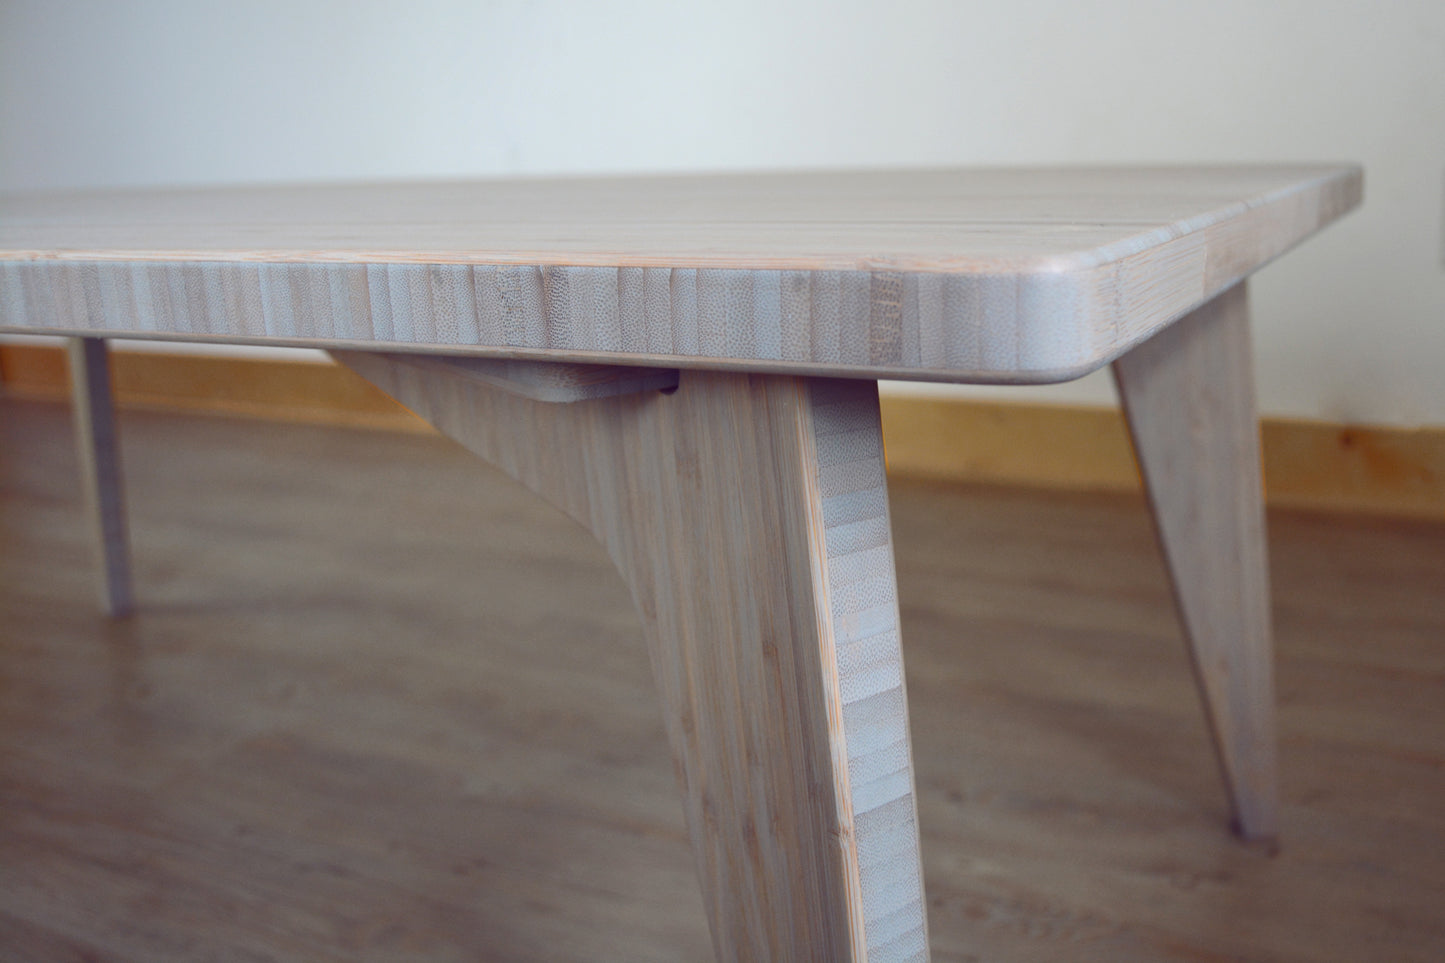 Sustainable grey bamboo table. Japanese, mid-century, Scandinavian and contemporary inspired.